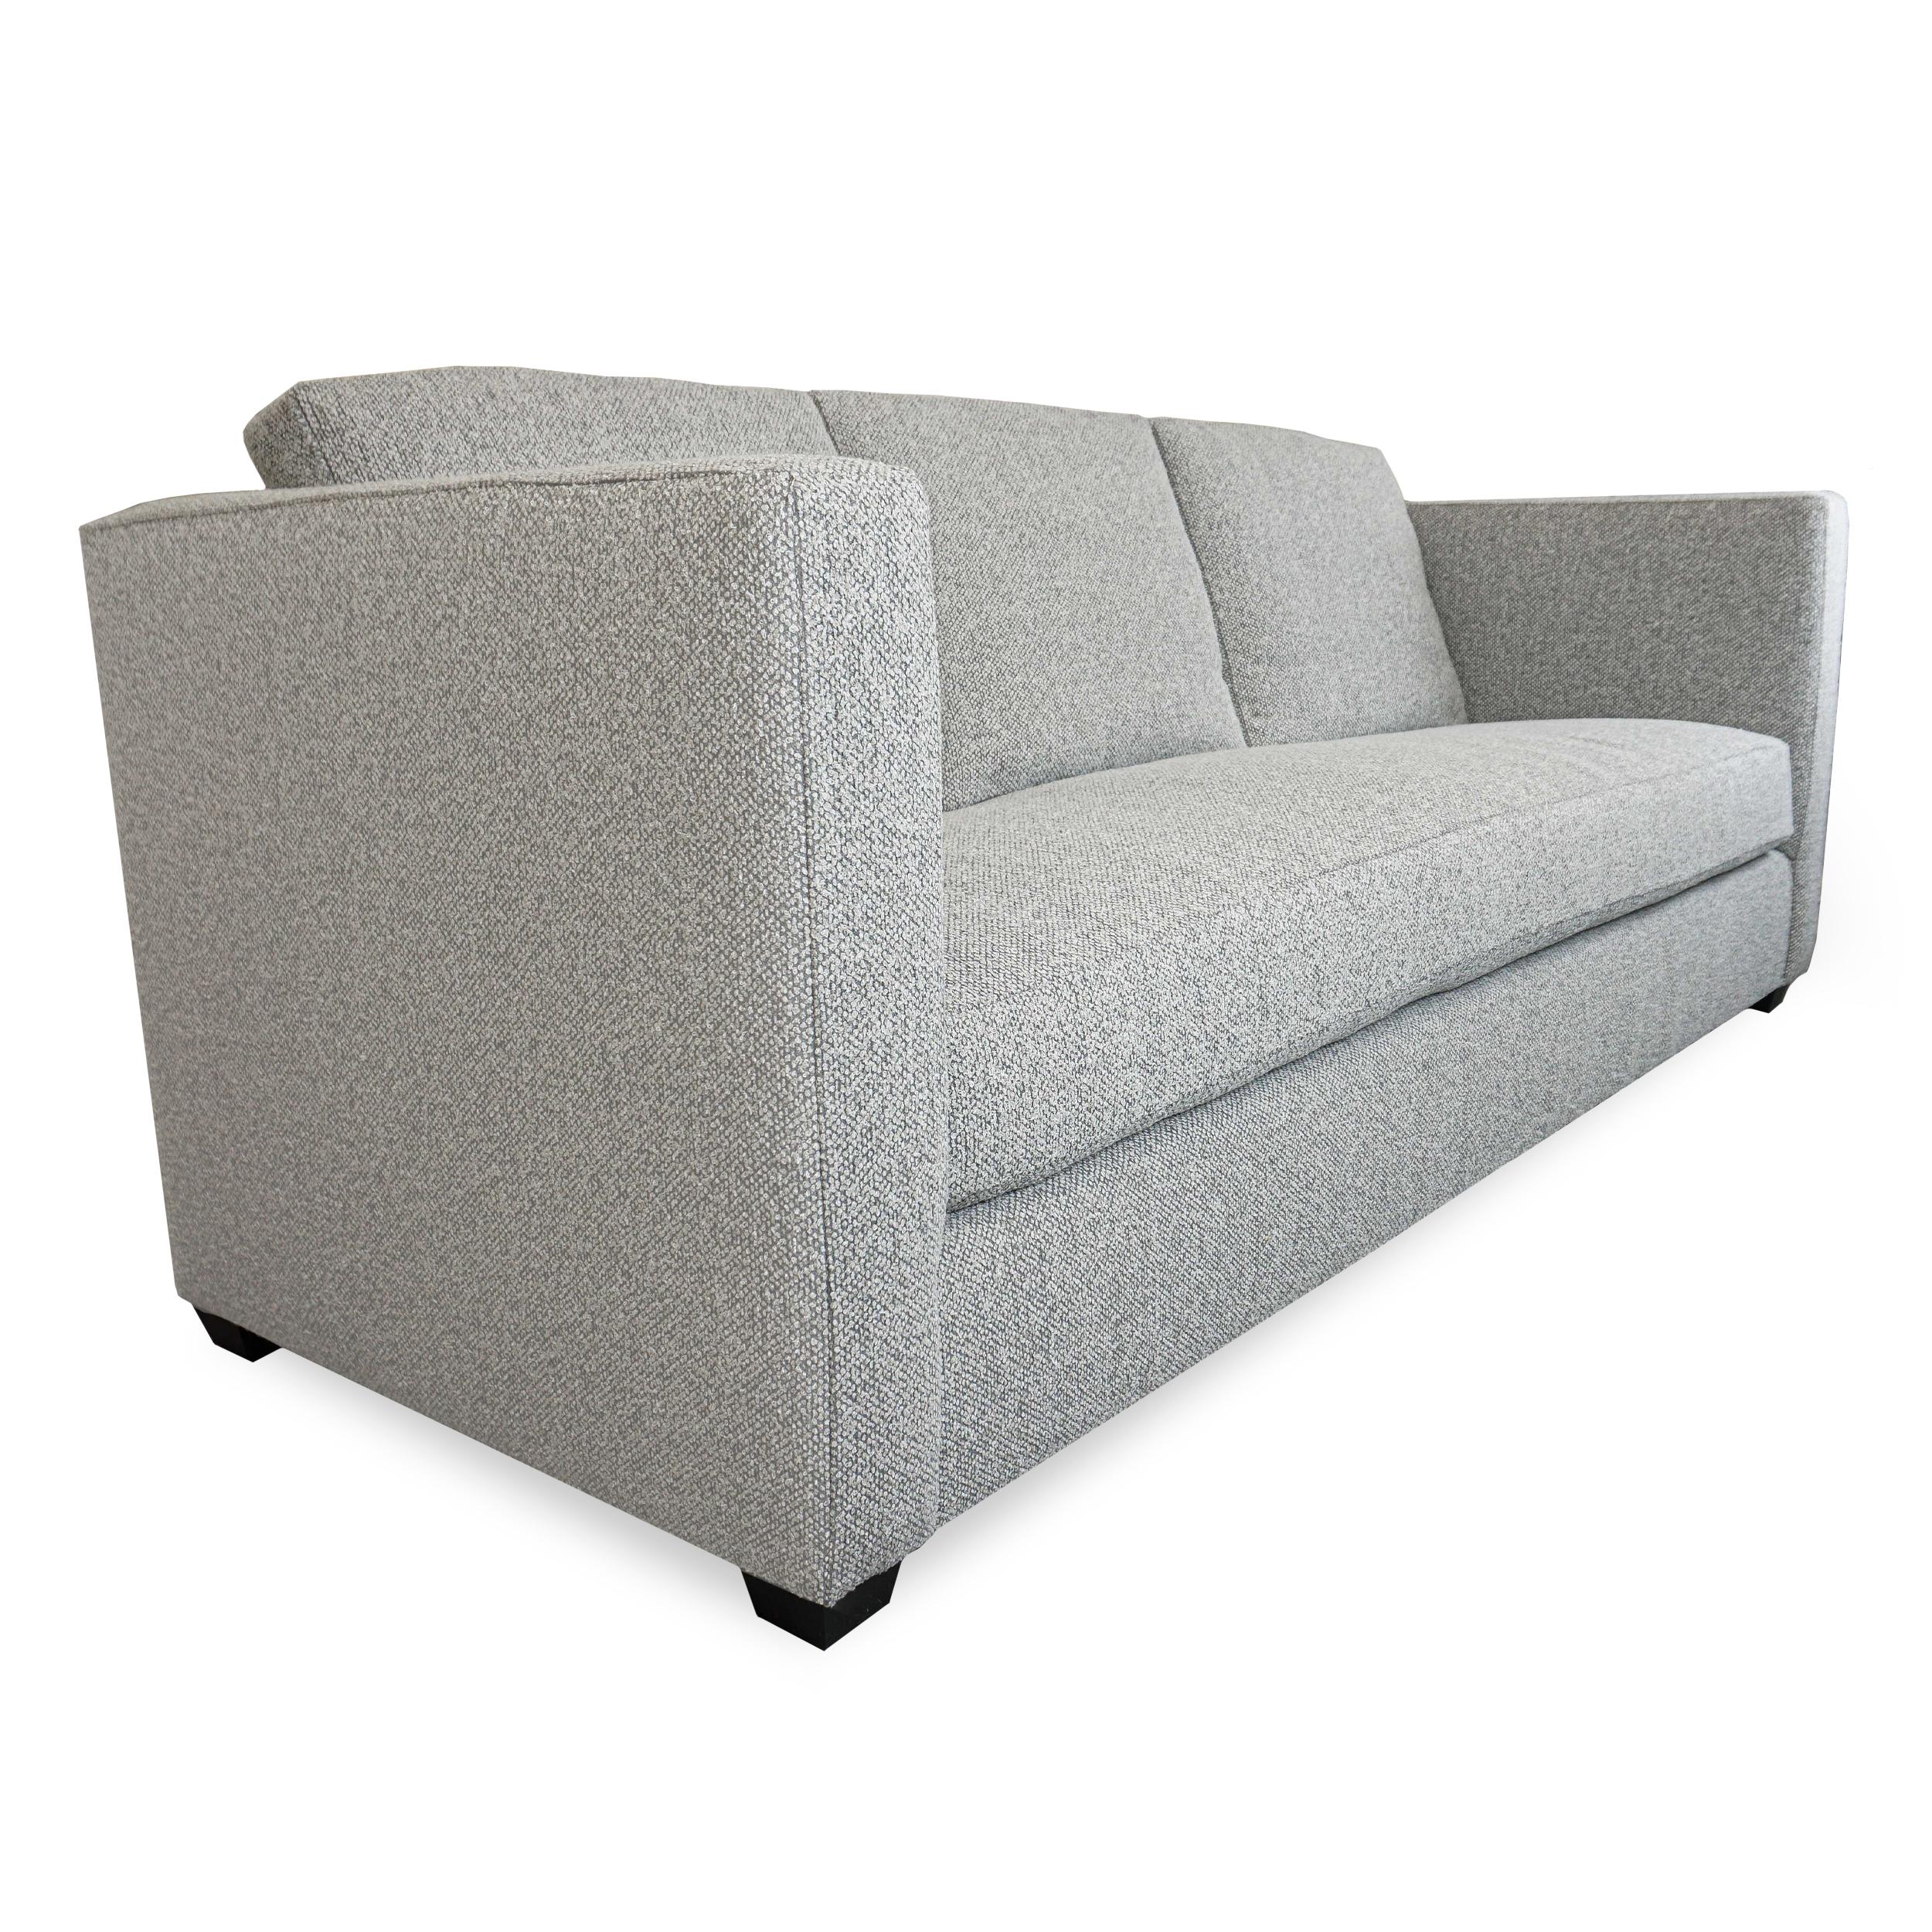 Tuxedo style sofa with a single firm down/feather wrapped foam bench cushion and 3 loose feather/down wrapped foam back pillows sit atop a solid maple frame with 8-way hand tied springs. Textured linen multi-tonal gray upholstery makes this piece